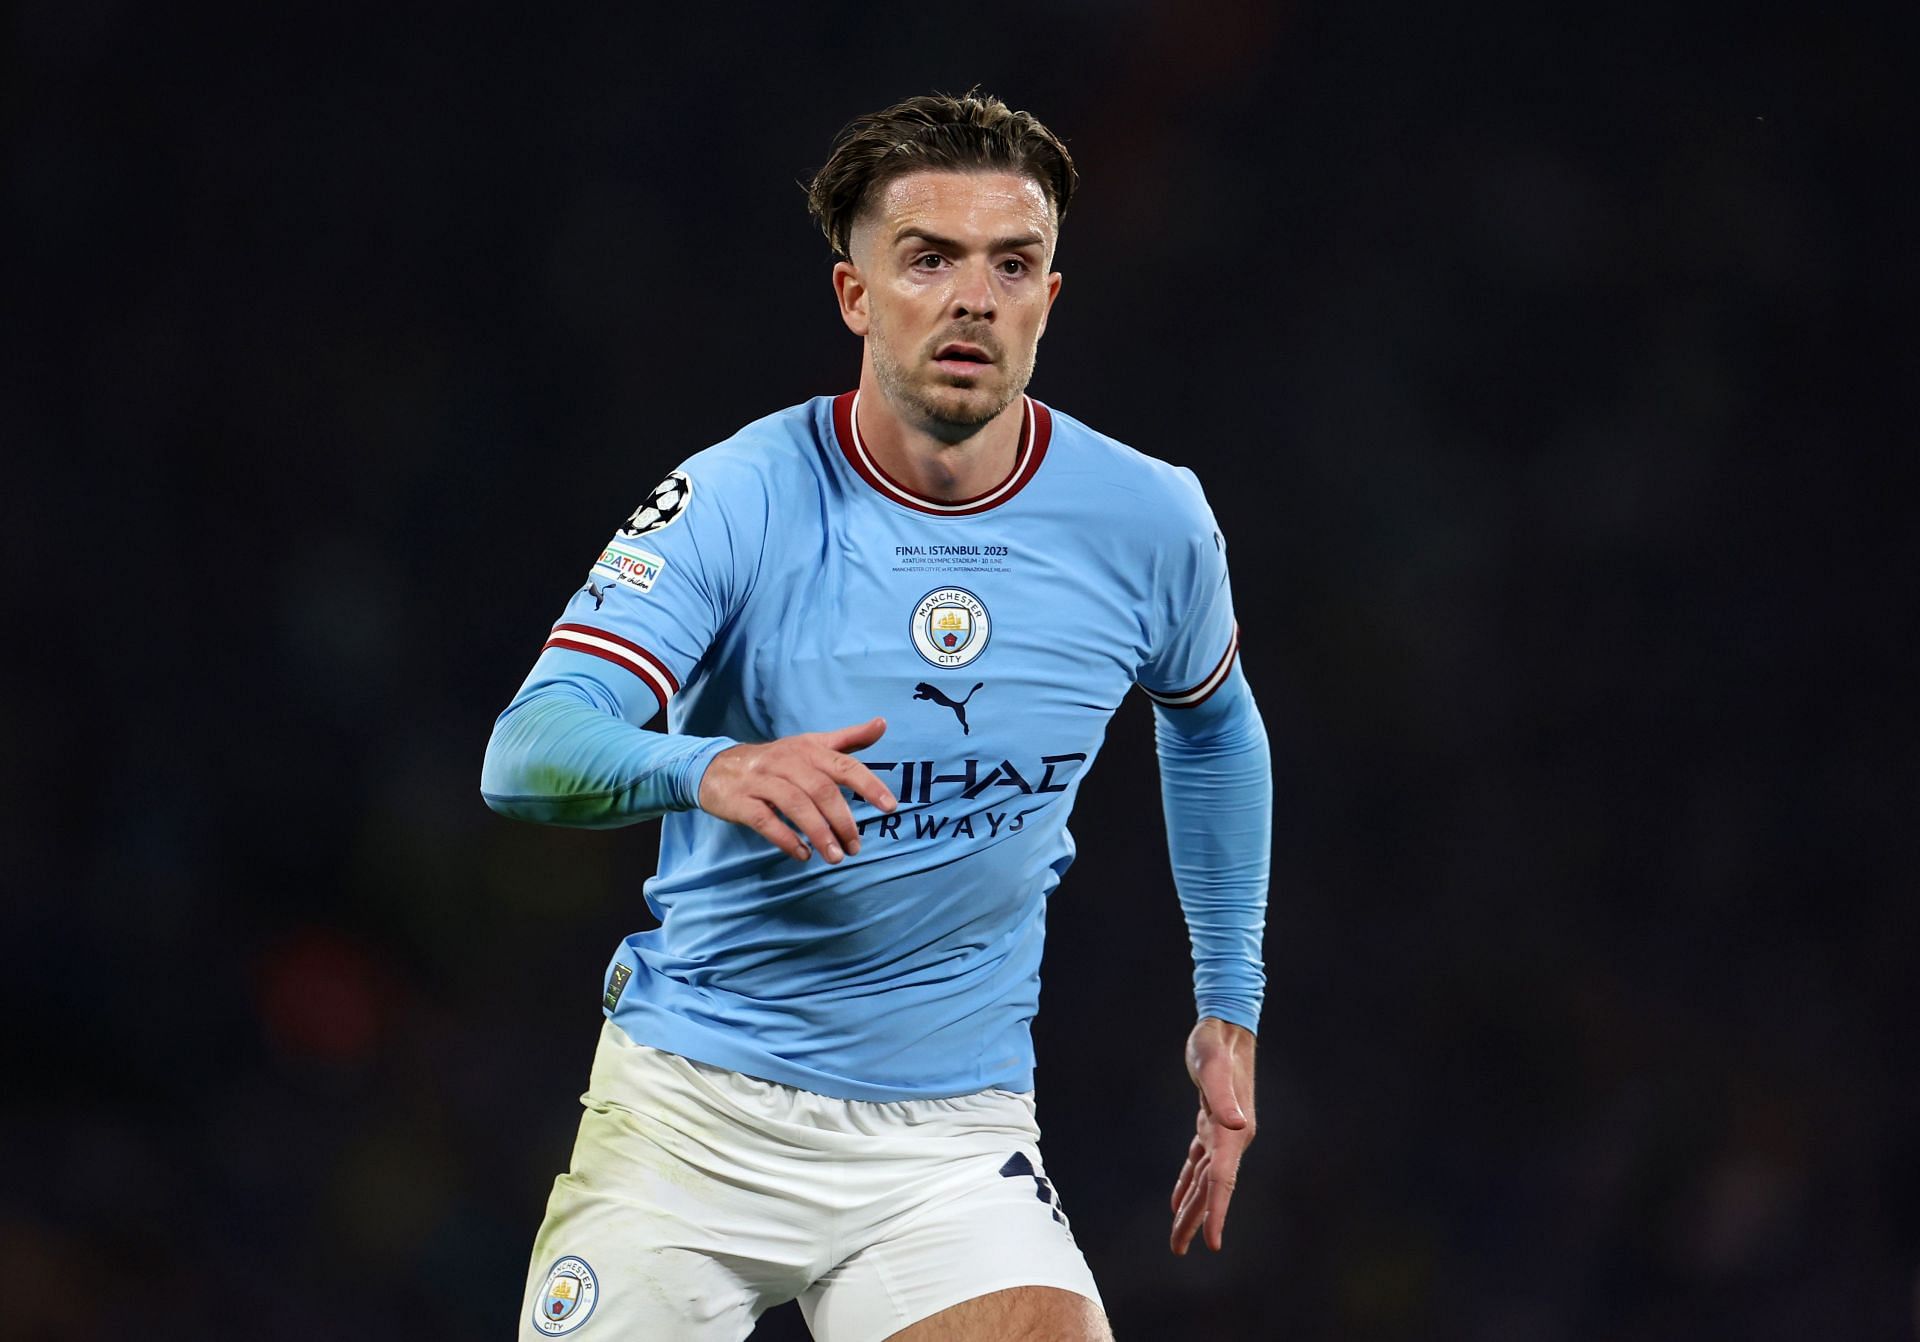 Jack Grealish has been excellent for Manchester City